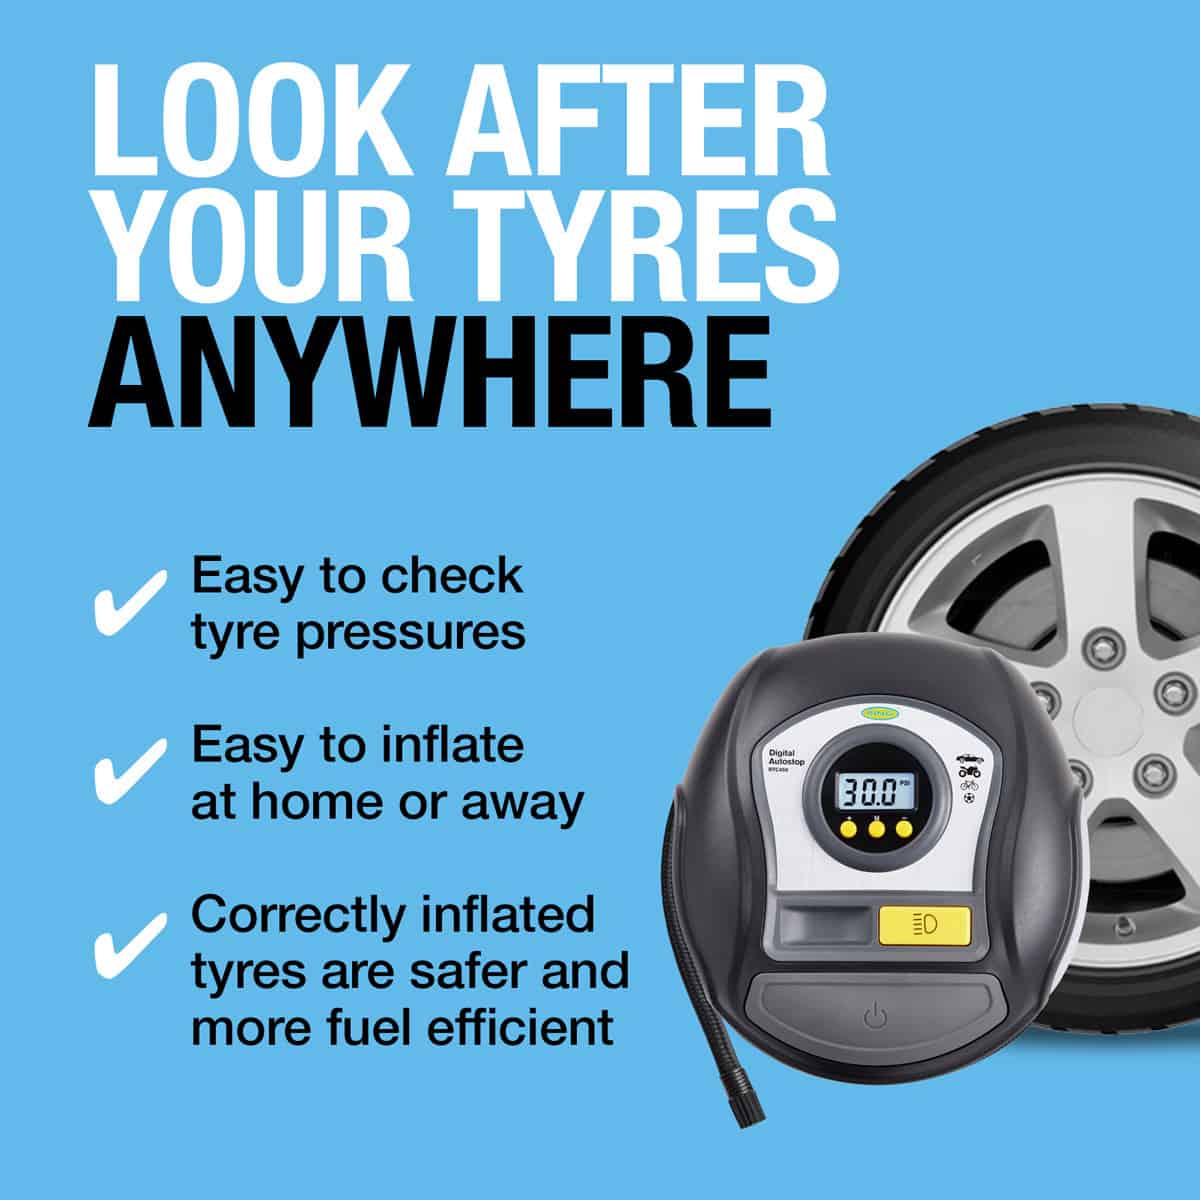 RTC450 Digital Auto-Stop Tyre Inflator: Long Power Cable and Air Hose: 3m 12V DC power cable and 50cm kink-free air hose for extended reach.